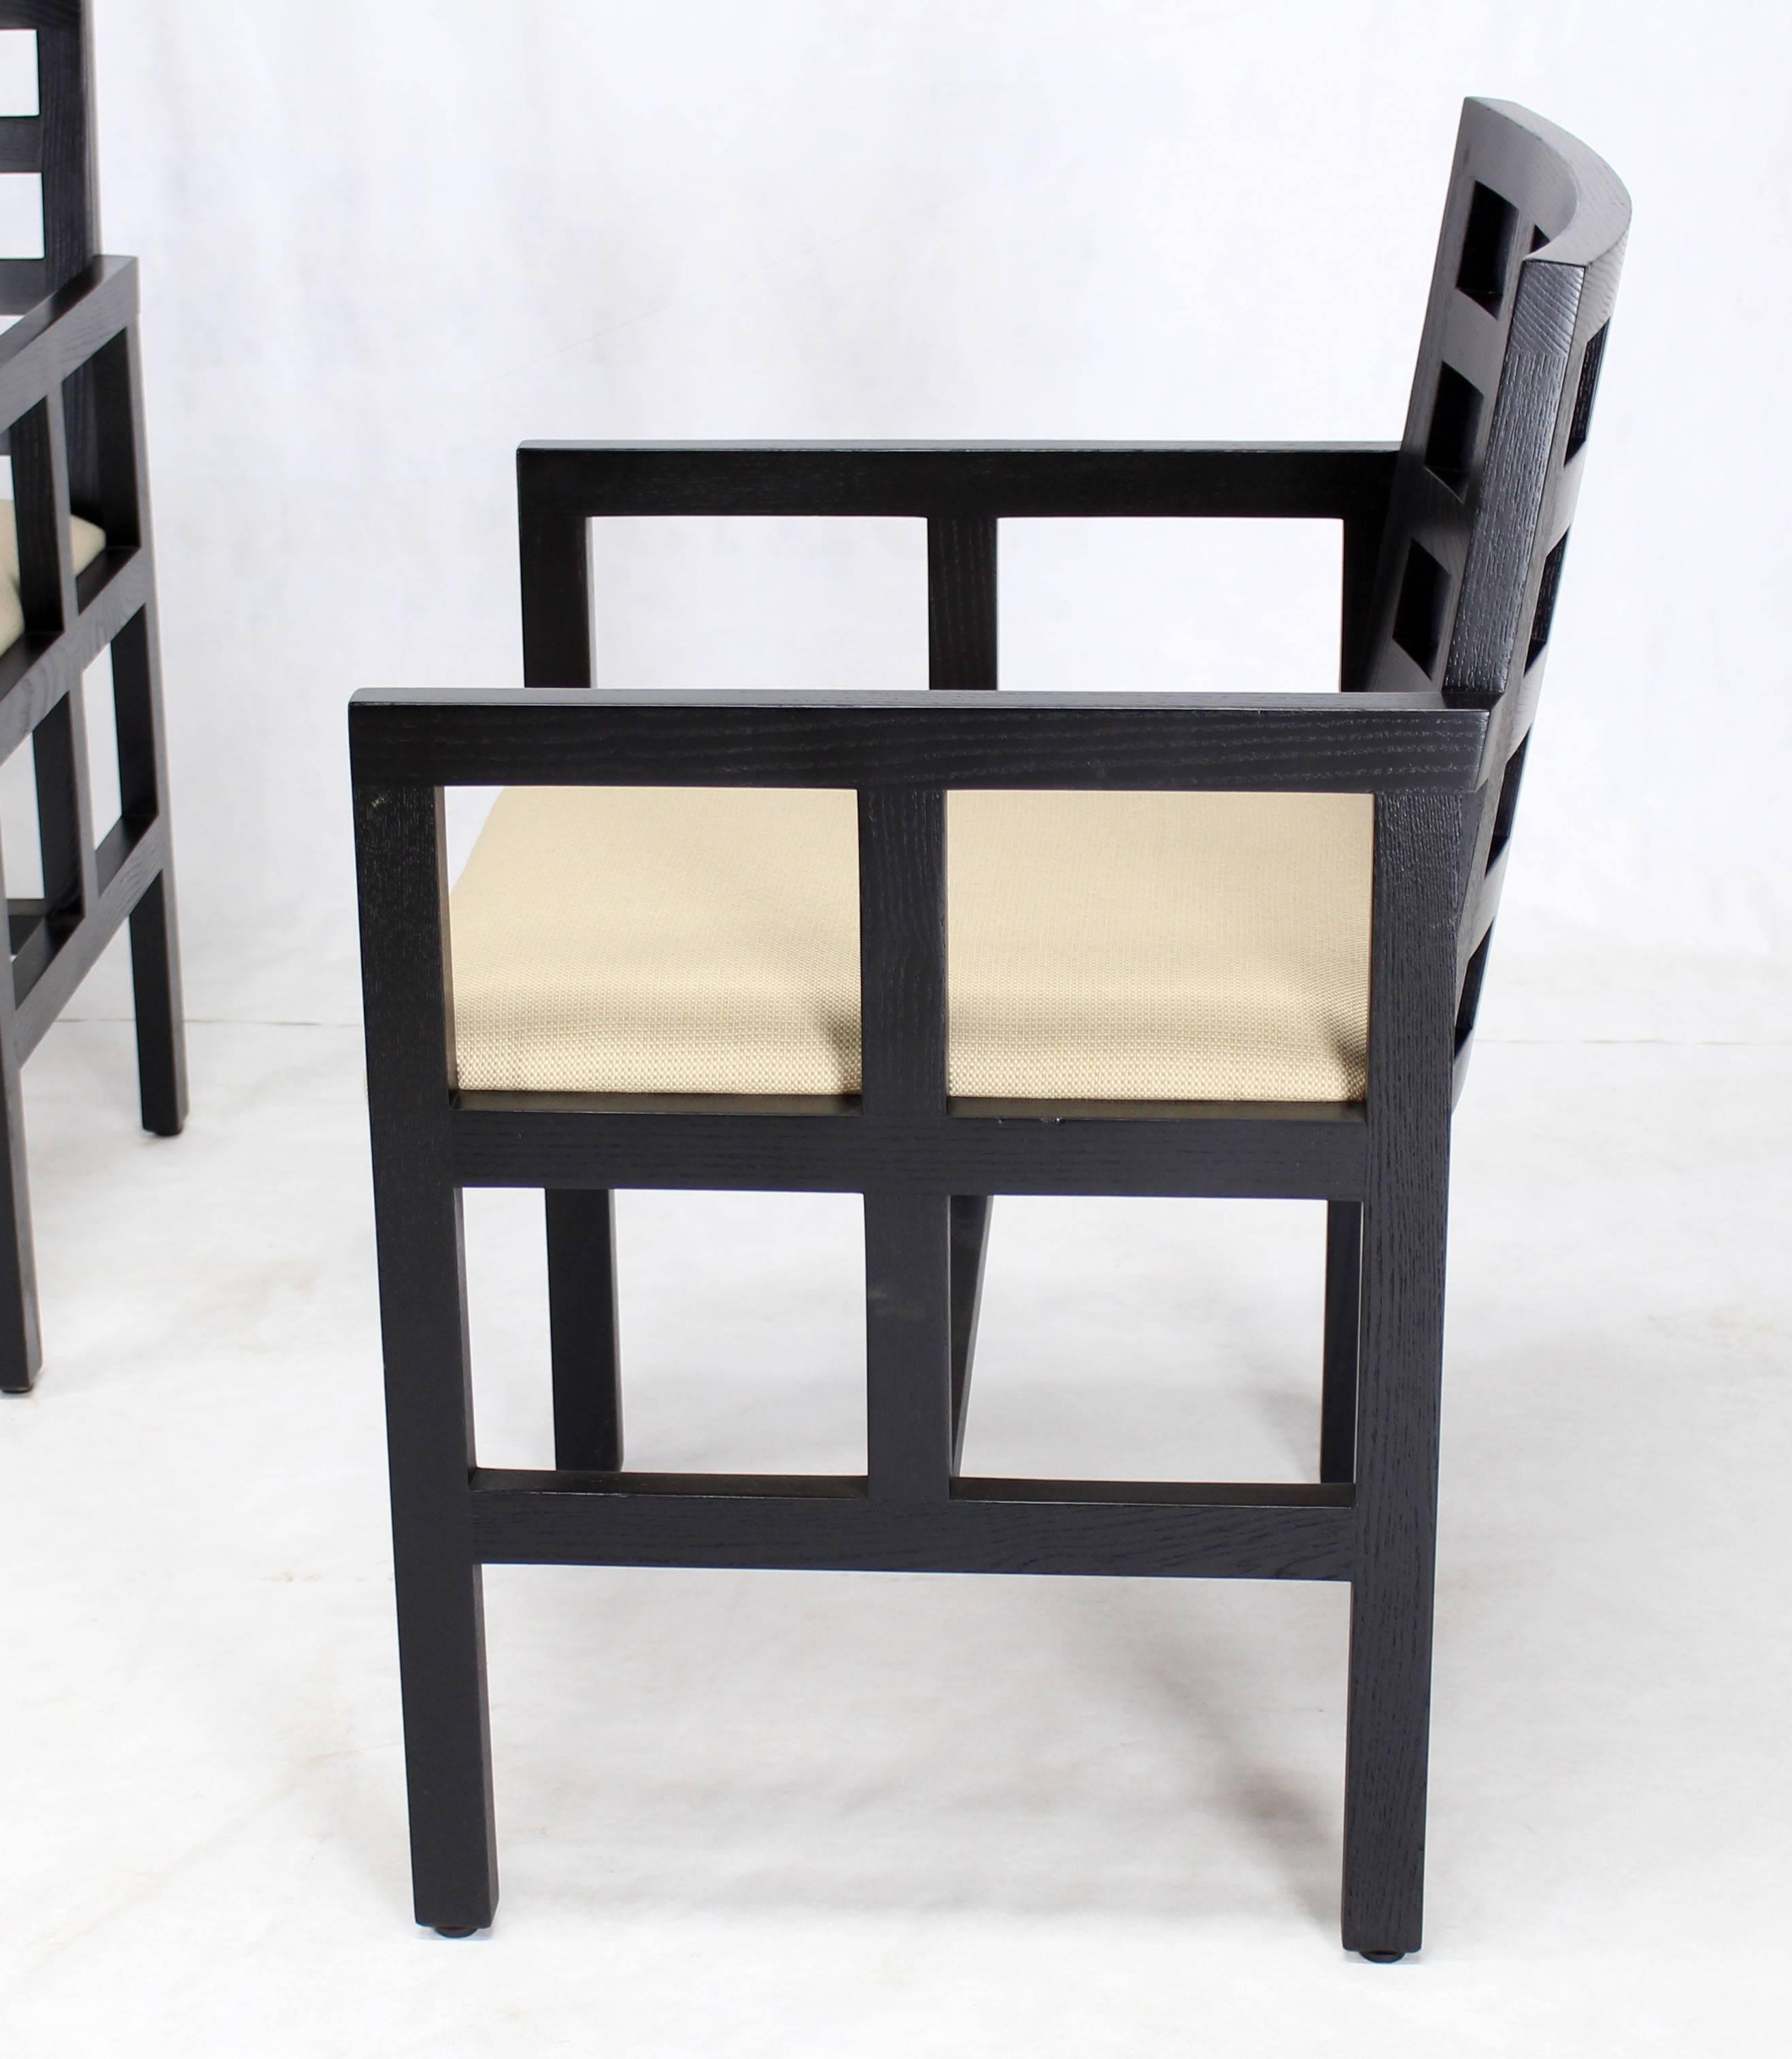 Set of four Mid-Century Modern frame sides design side chairs. Very solid construction and sharp look. Ebonised finish with solid wood upholstery.